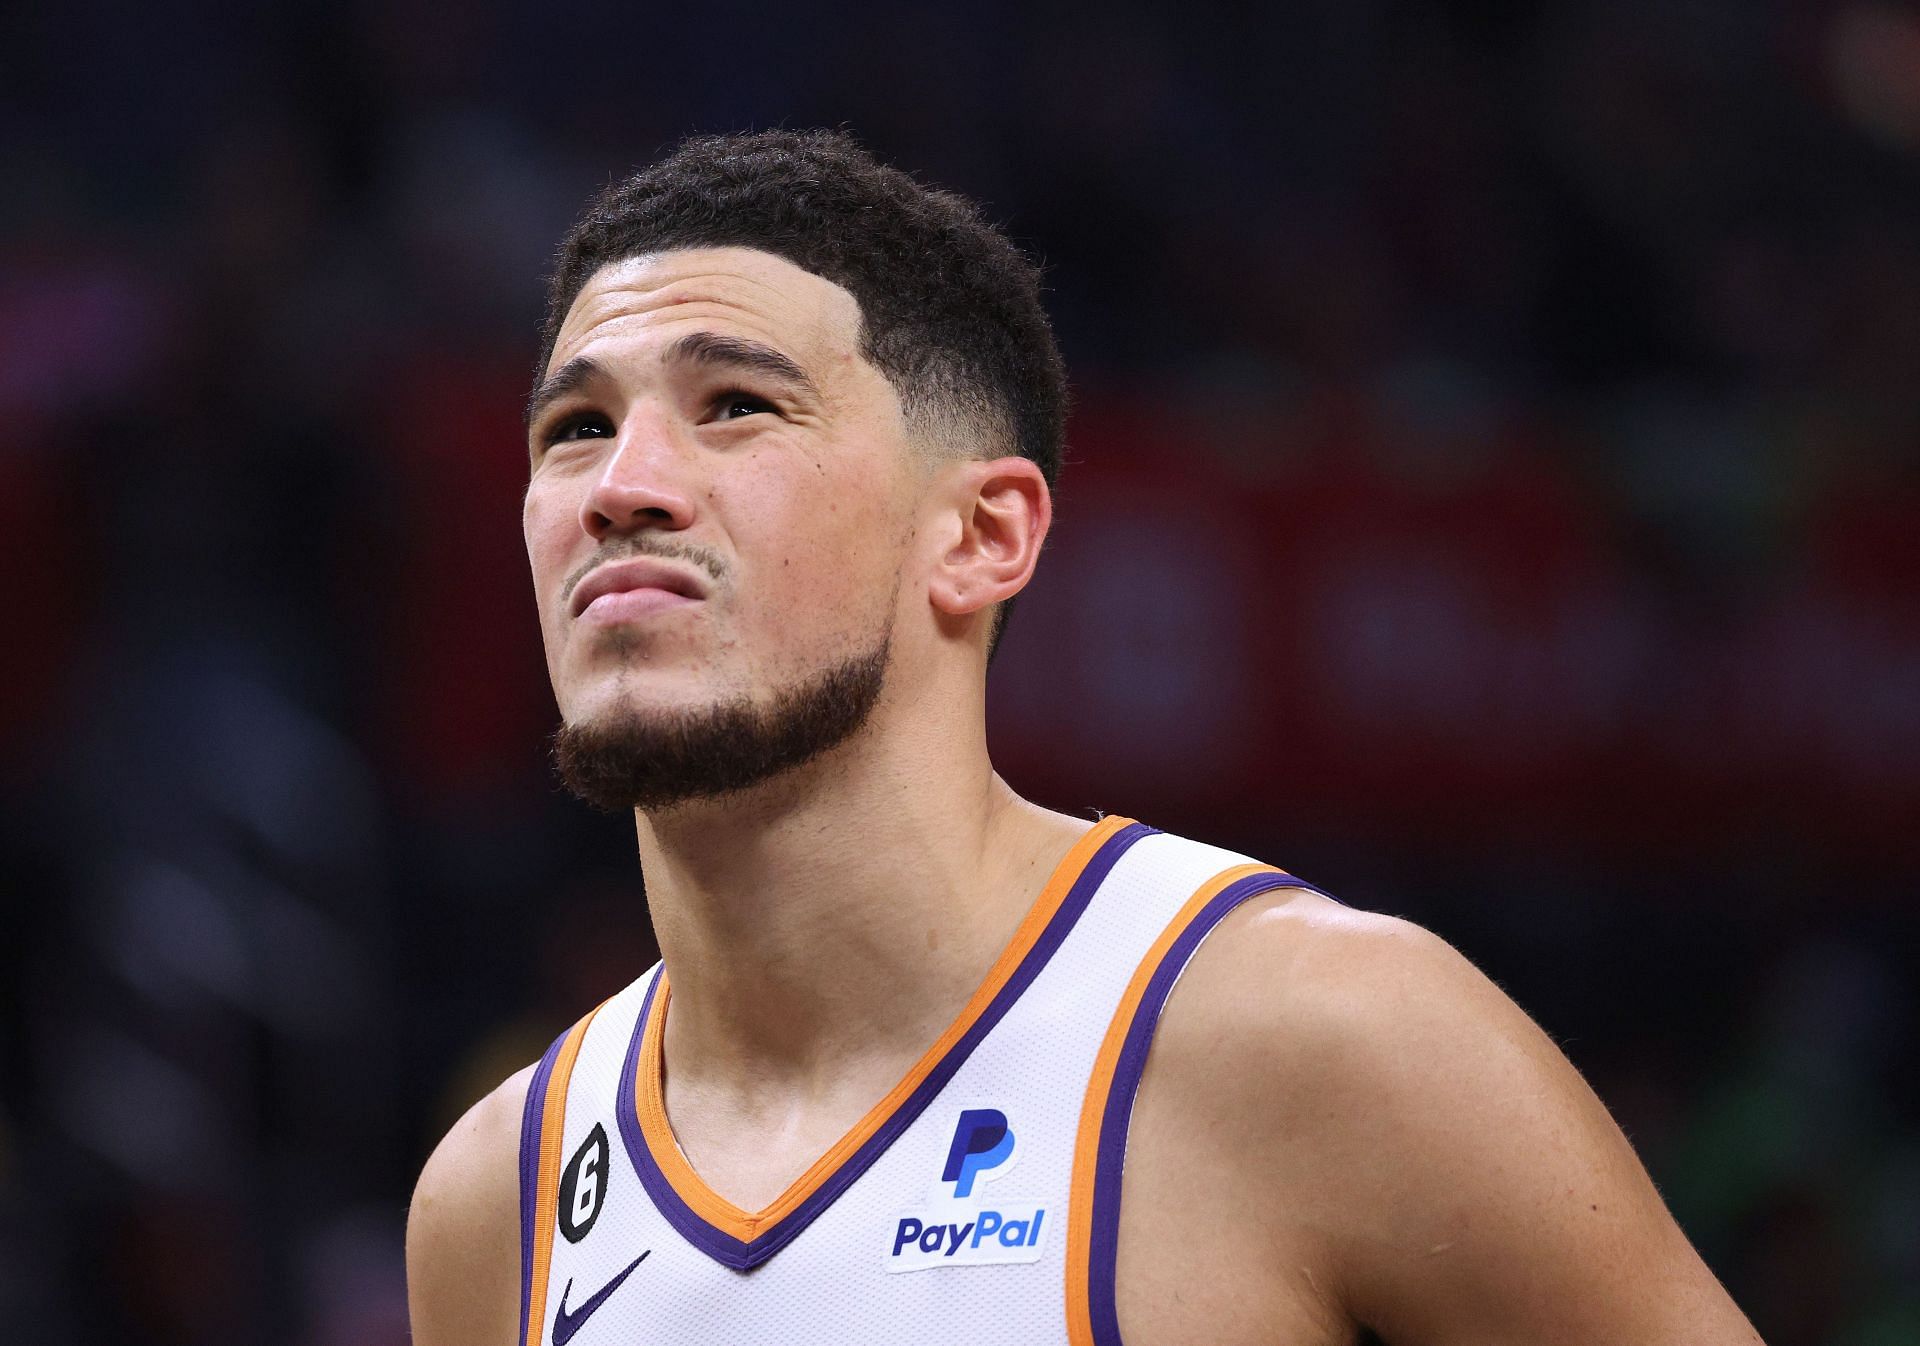 Phoenix Suns star Devin Booker injury will keep him out at least a month.